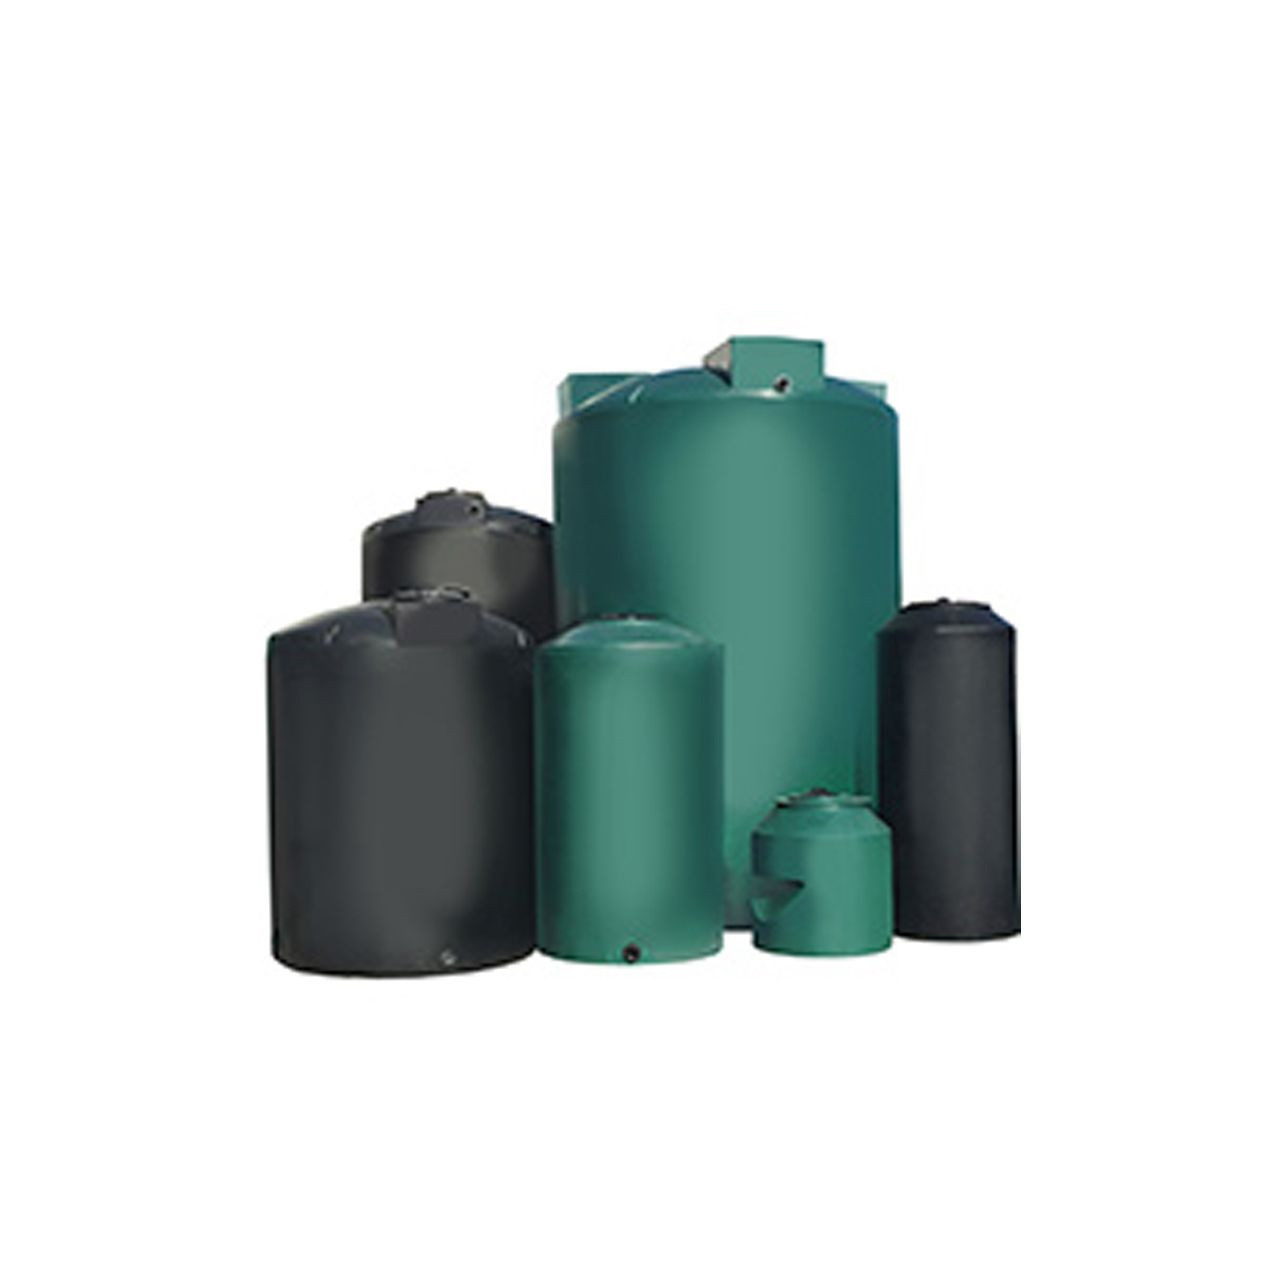 Chem-Tainer 1100 Gallon Vertical Water Storage Tank | TC8657IW-GREEN